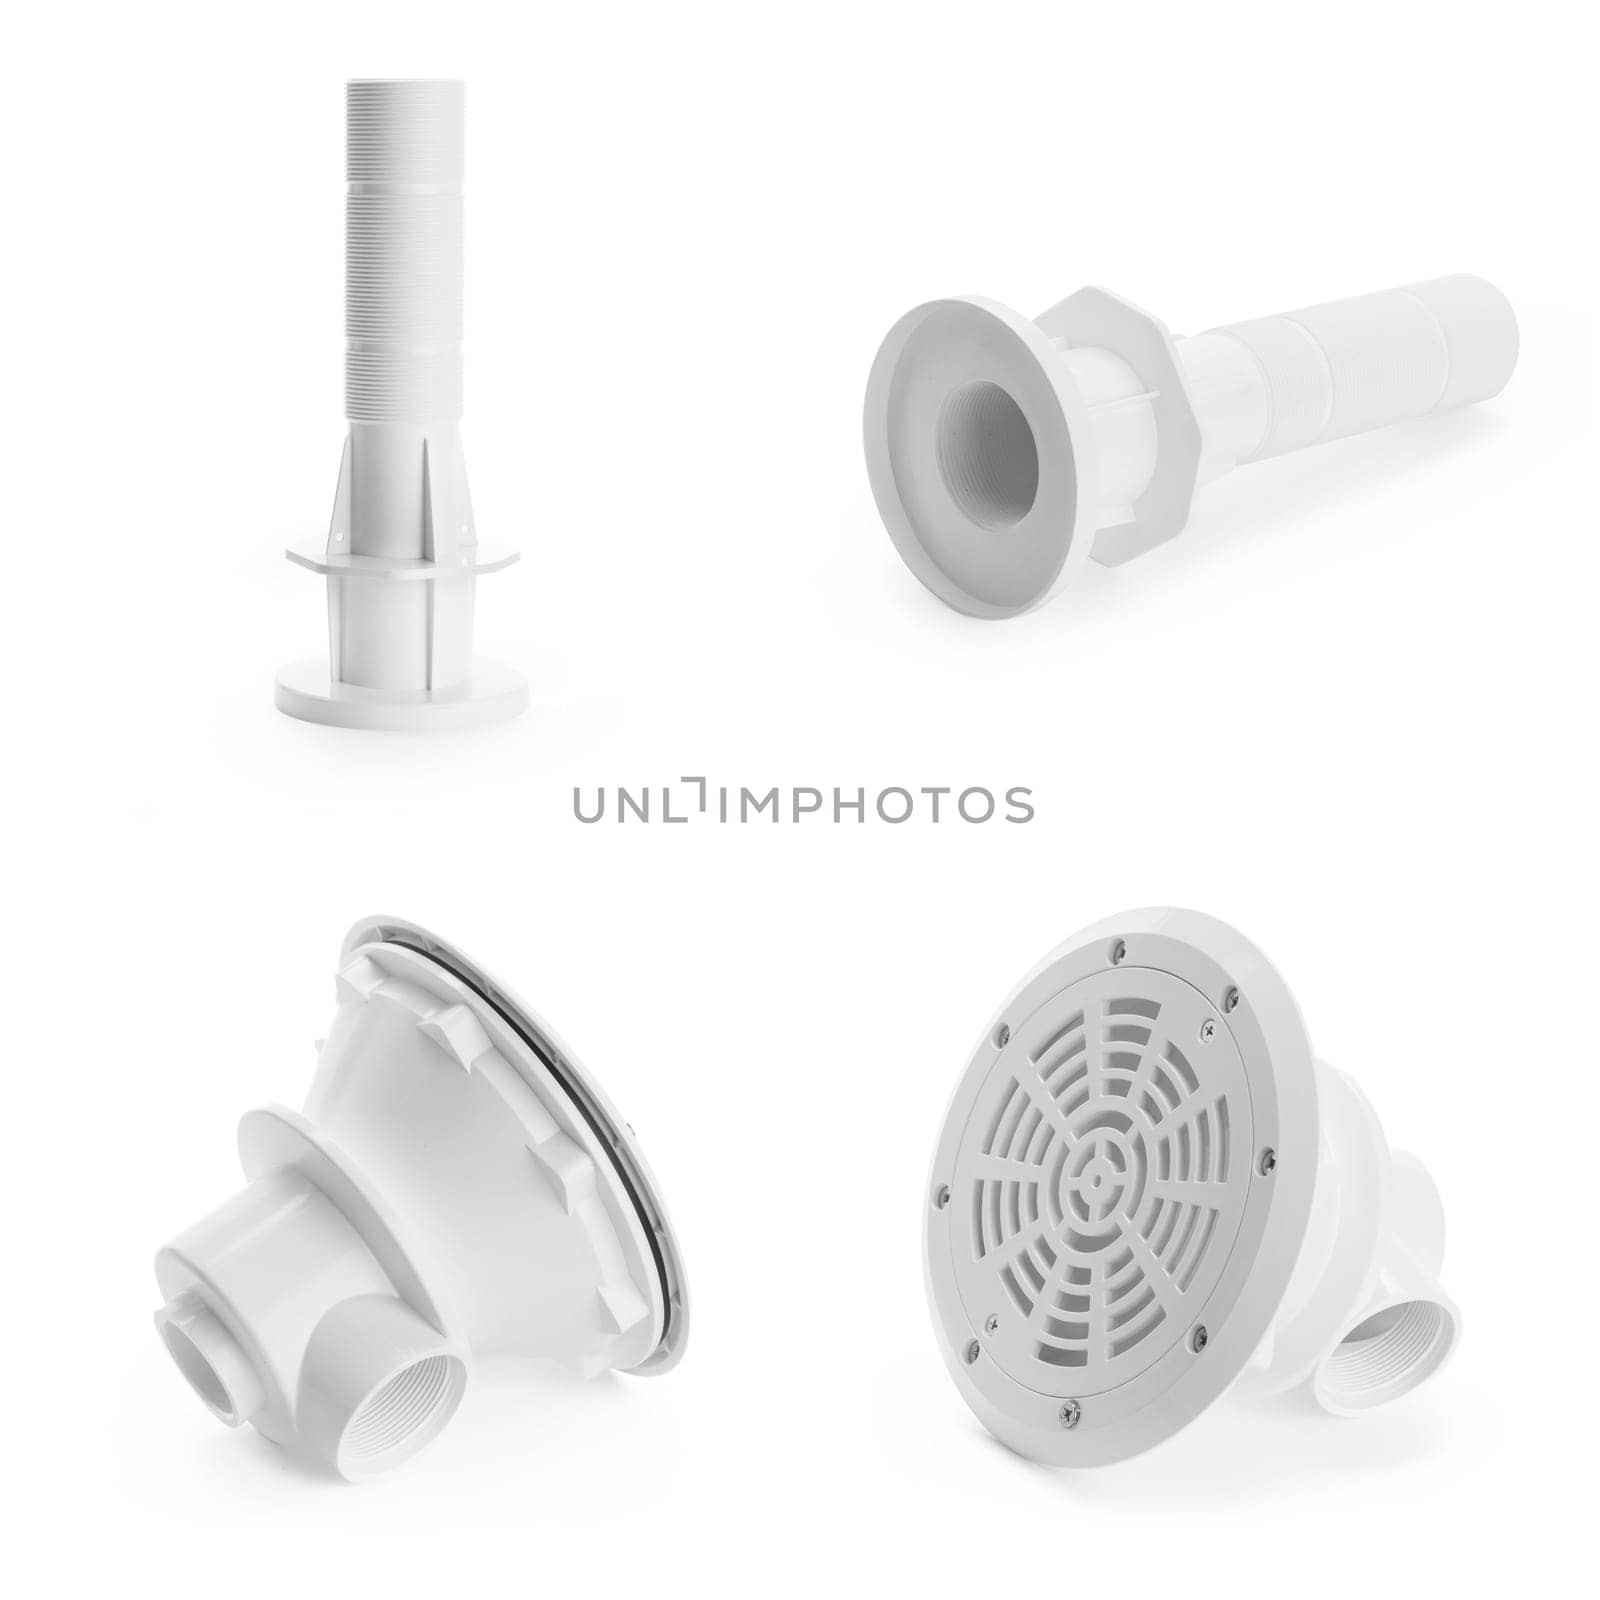 Plumber tubes for water isolated on a white background